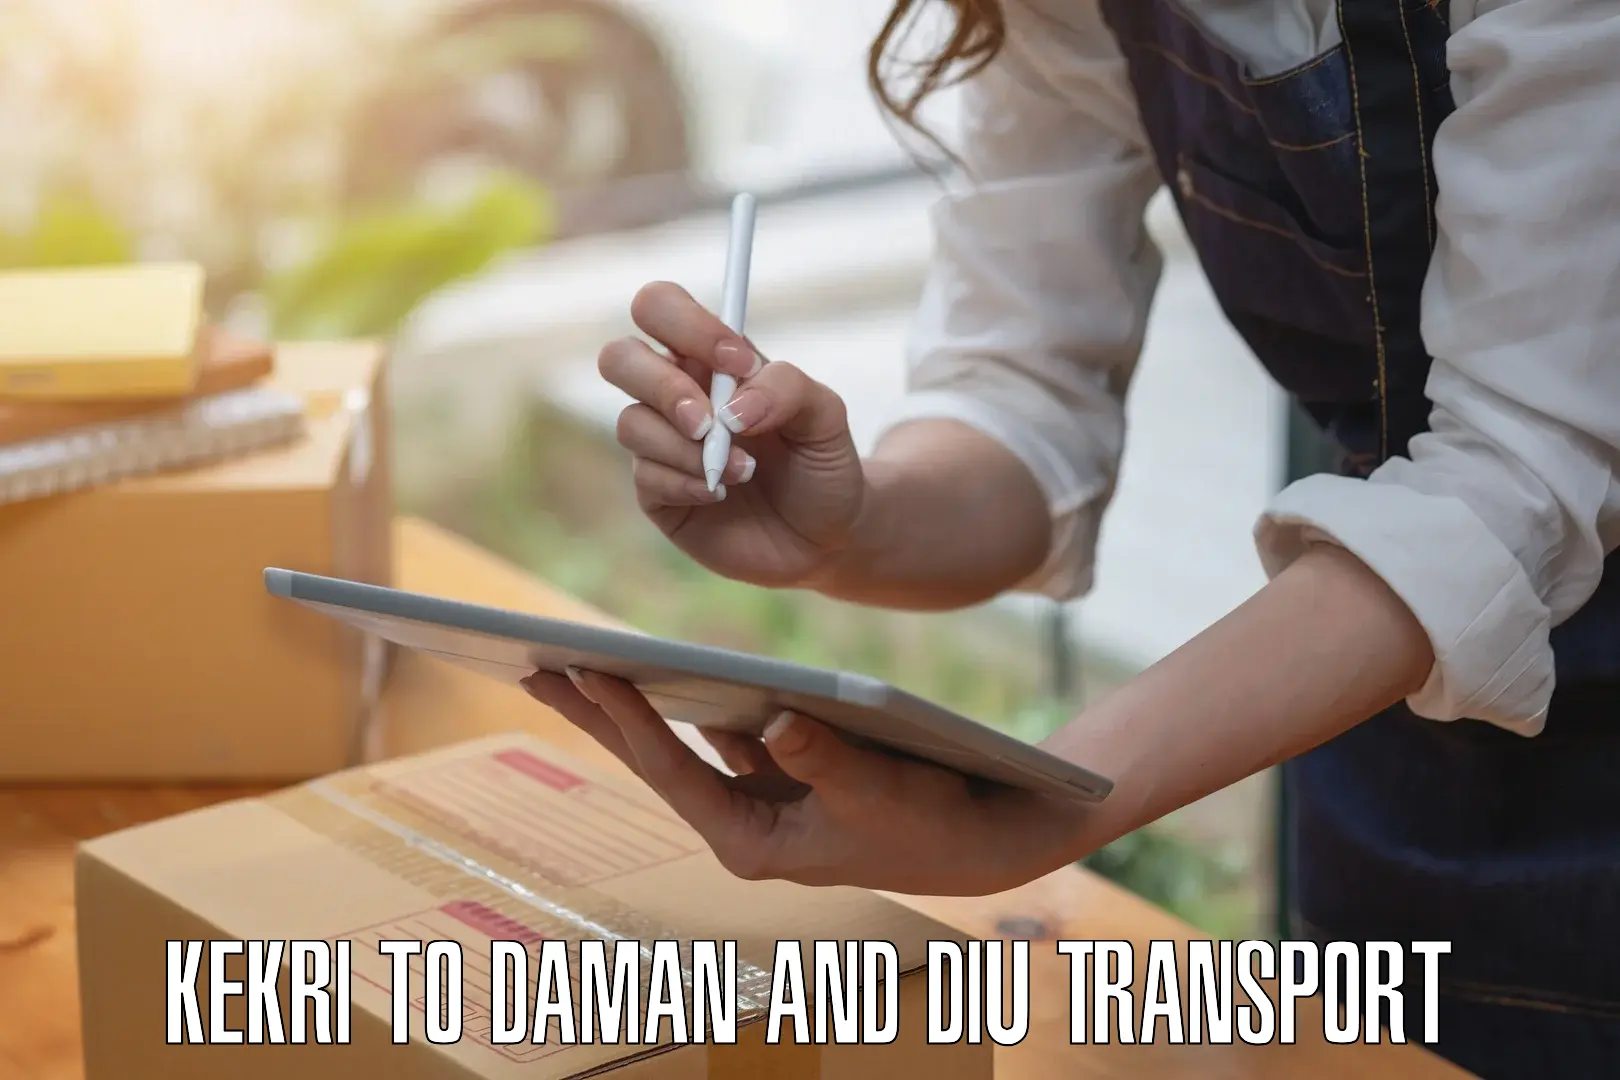 Express transport services in Kekri to Daman and Diu